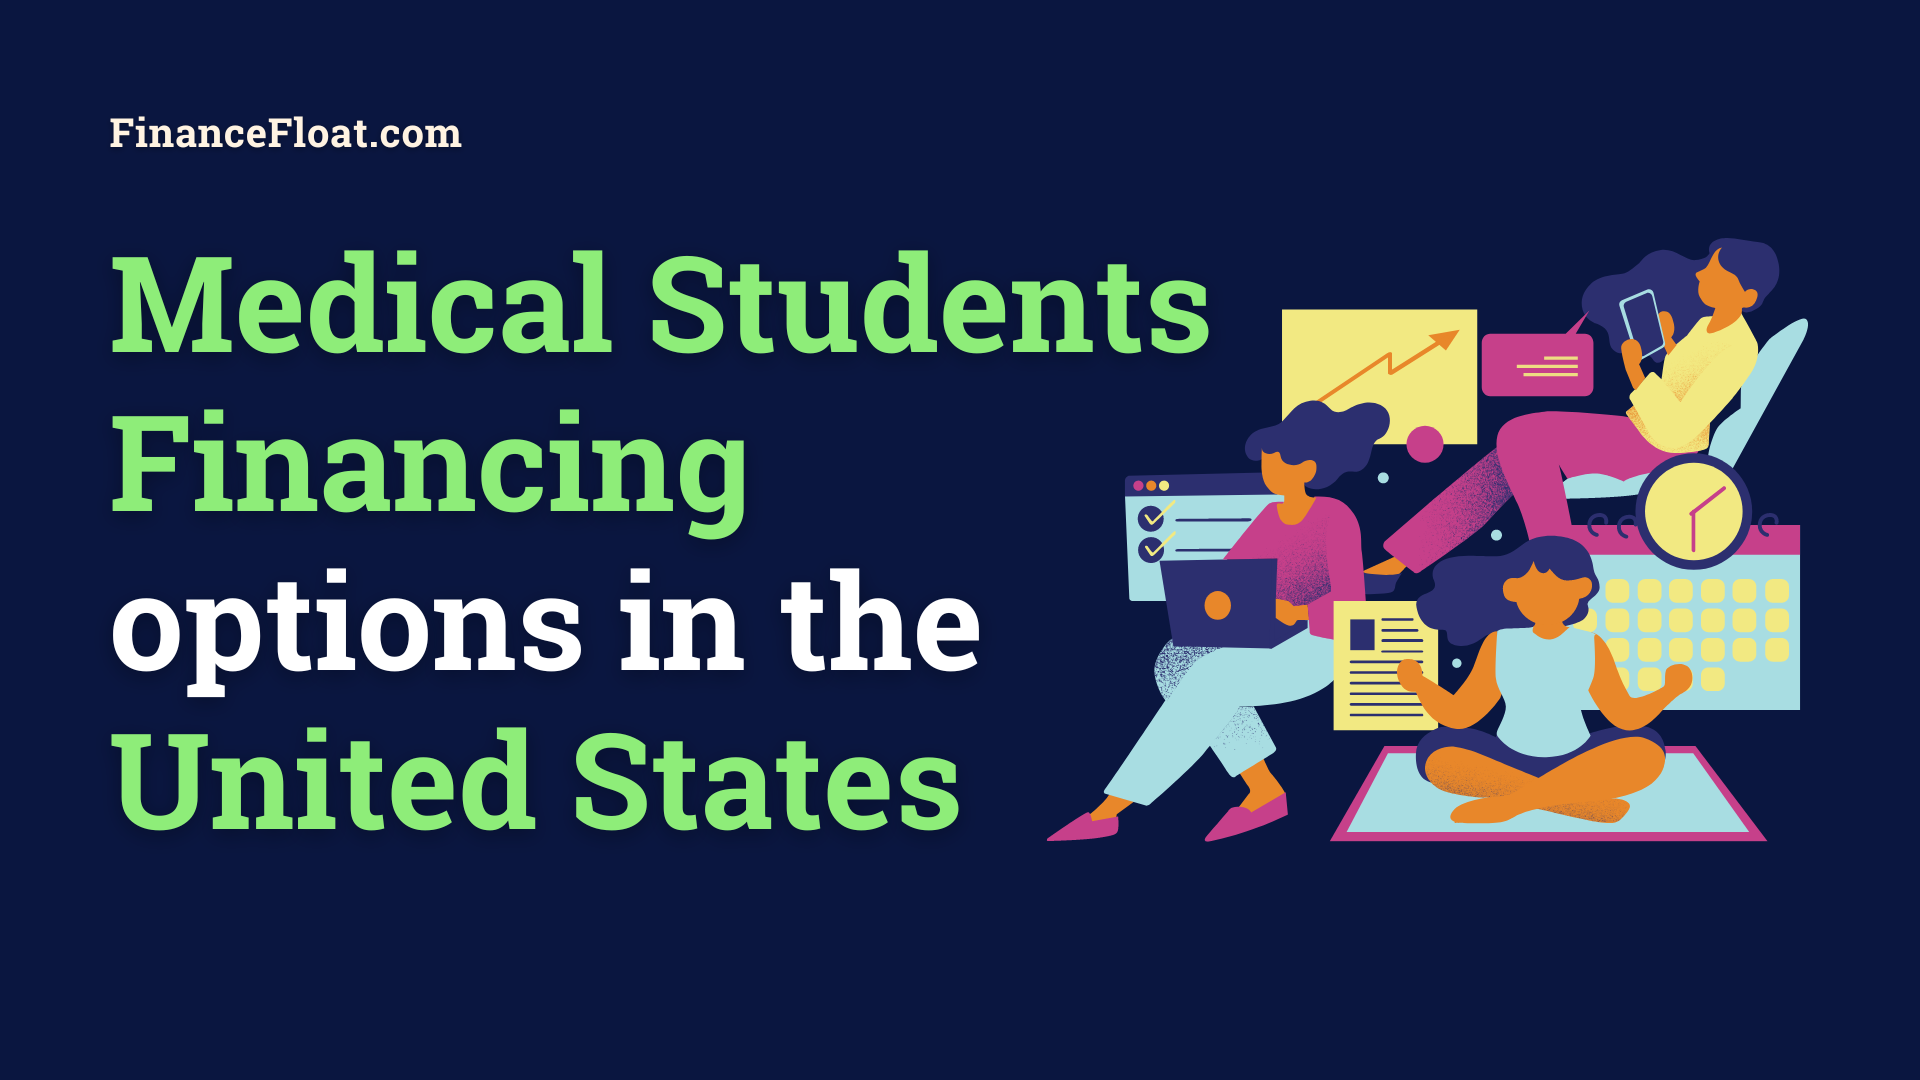 Medical Students Financing options in the United States